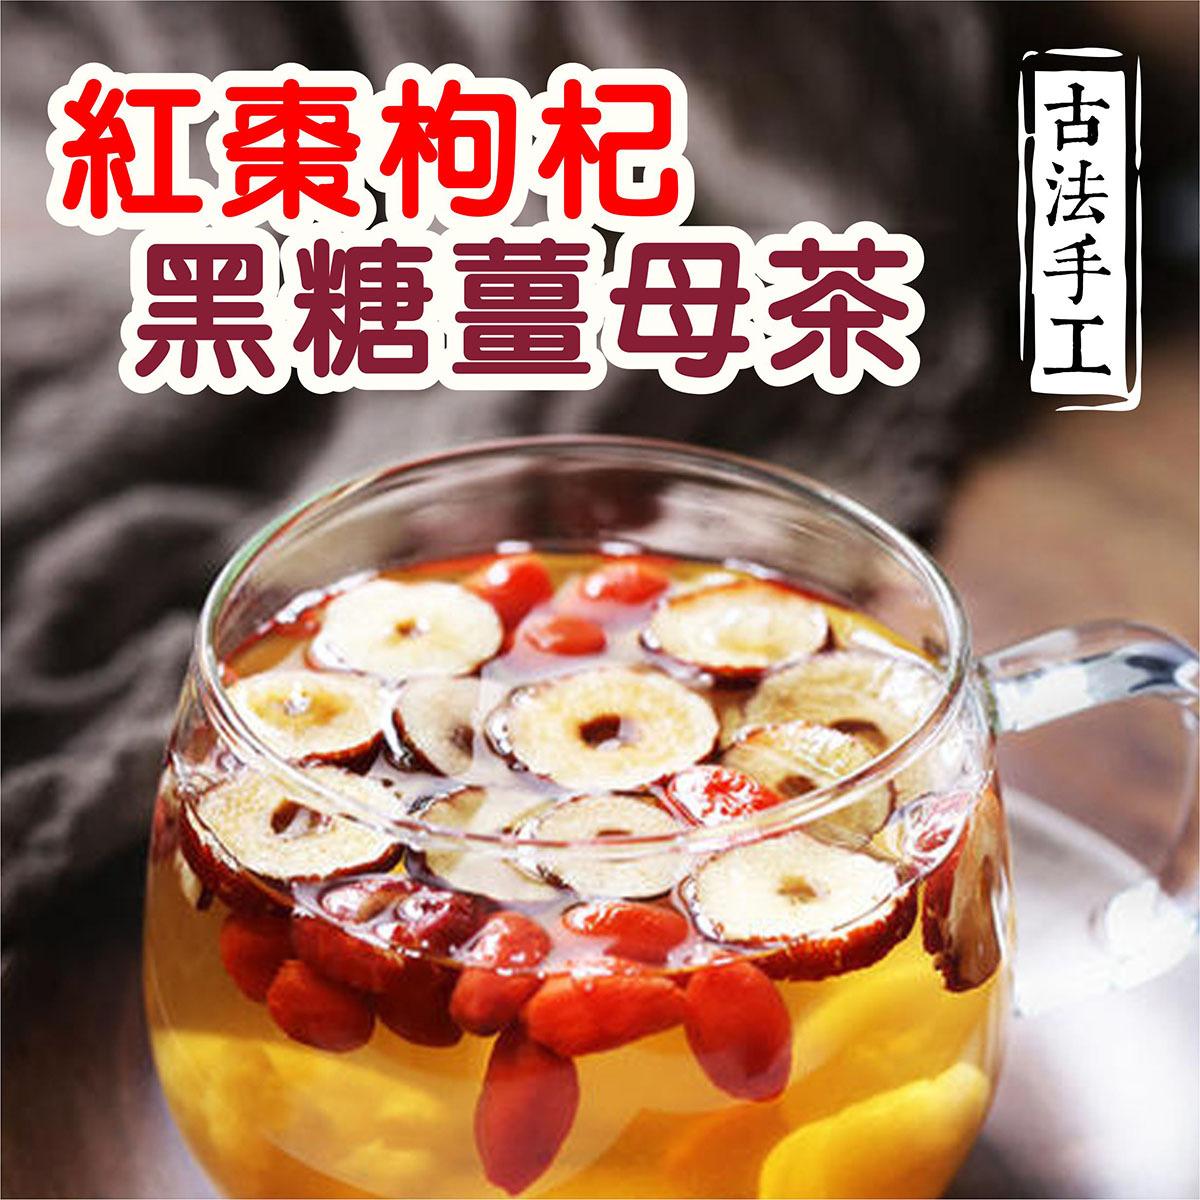 Taiwan Hand-made by ancient method] Red dates Wolfberry and Black sugar Ginger Tea (5 packets)｜ 